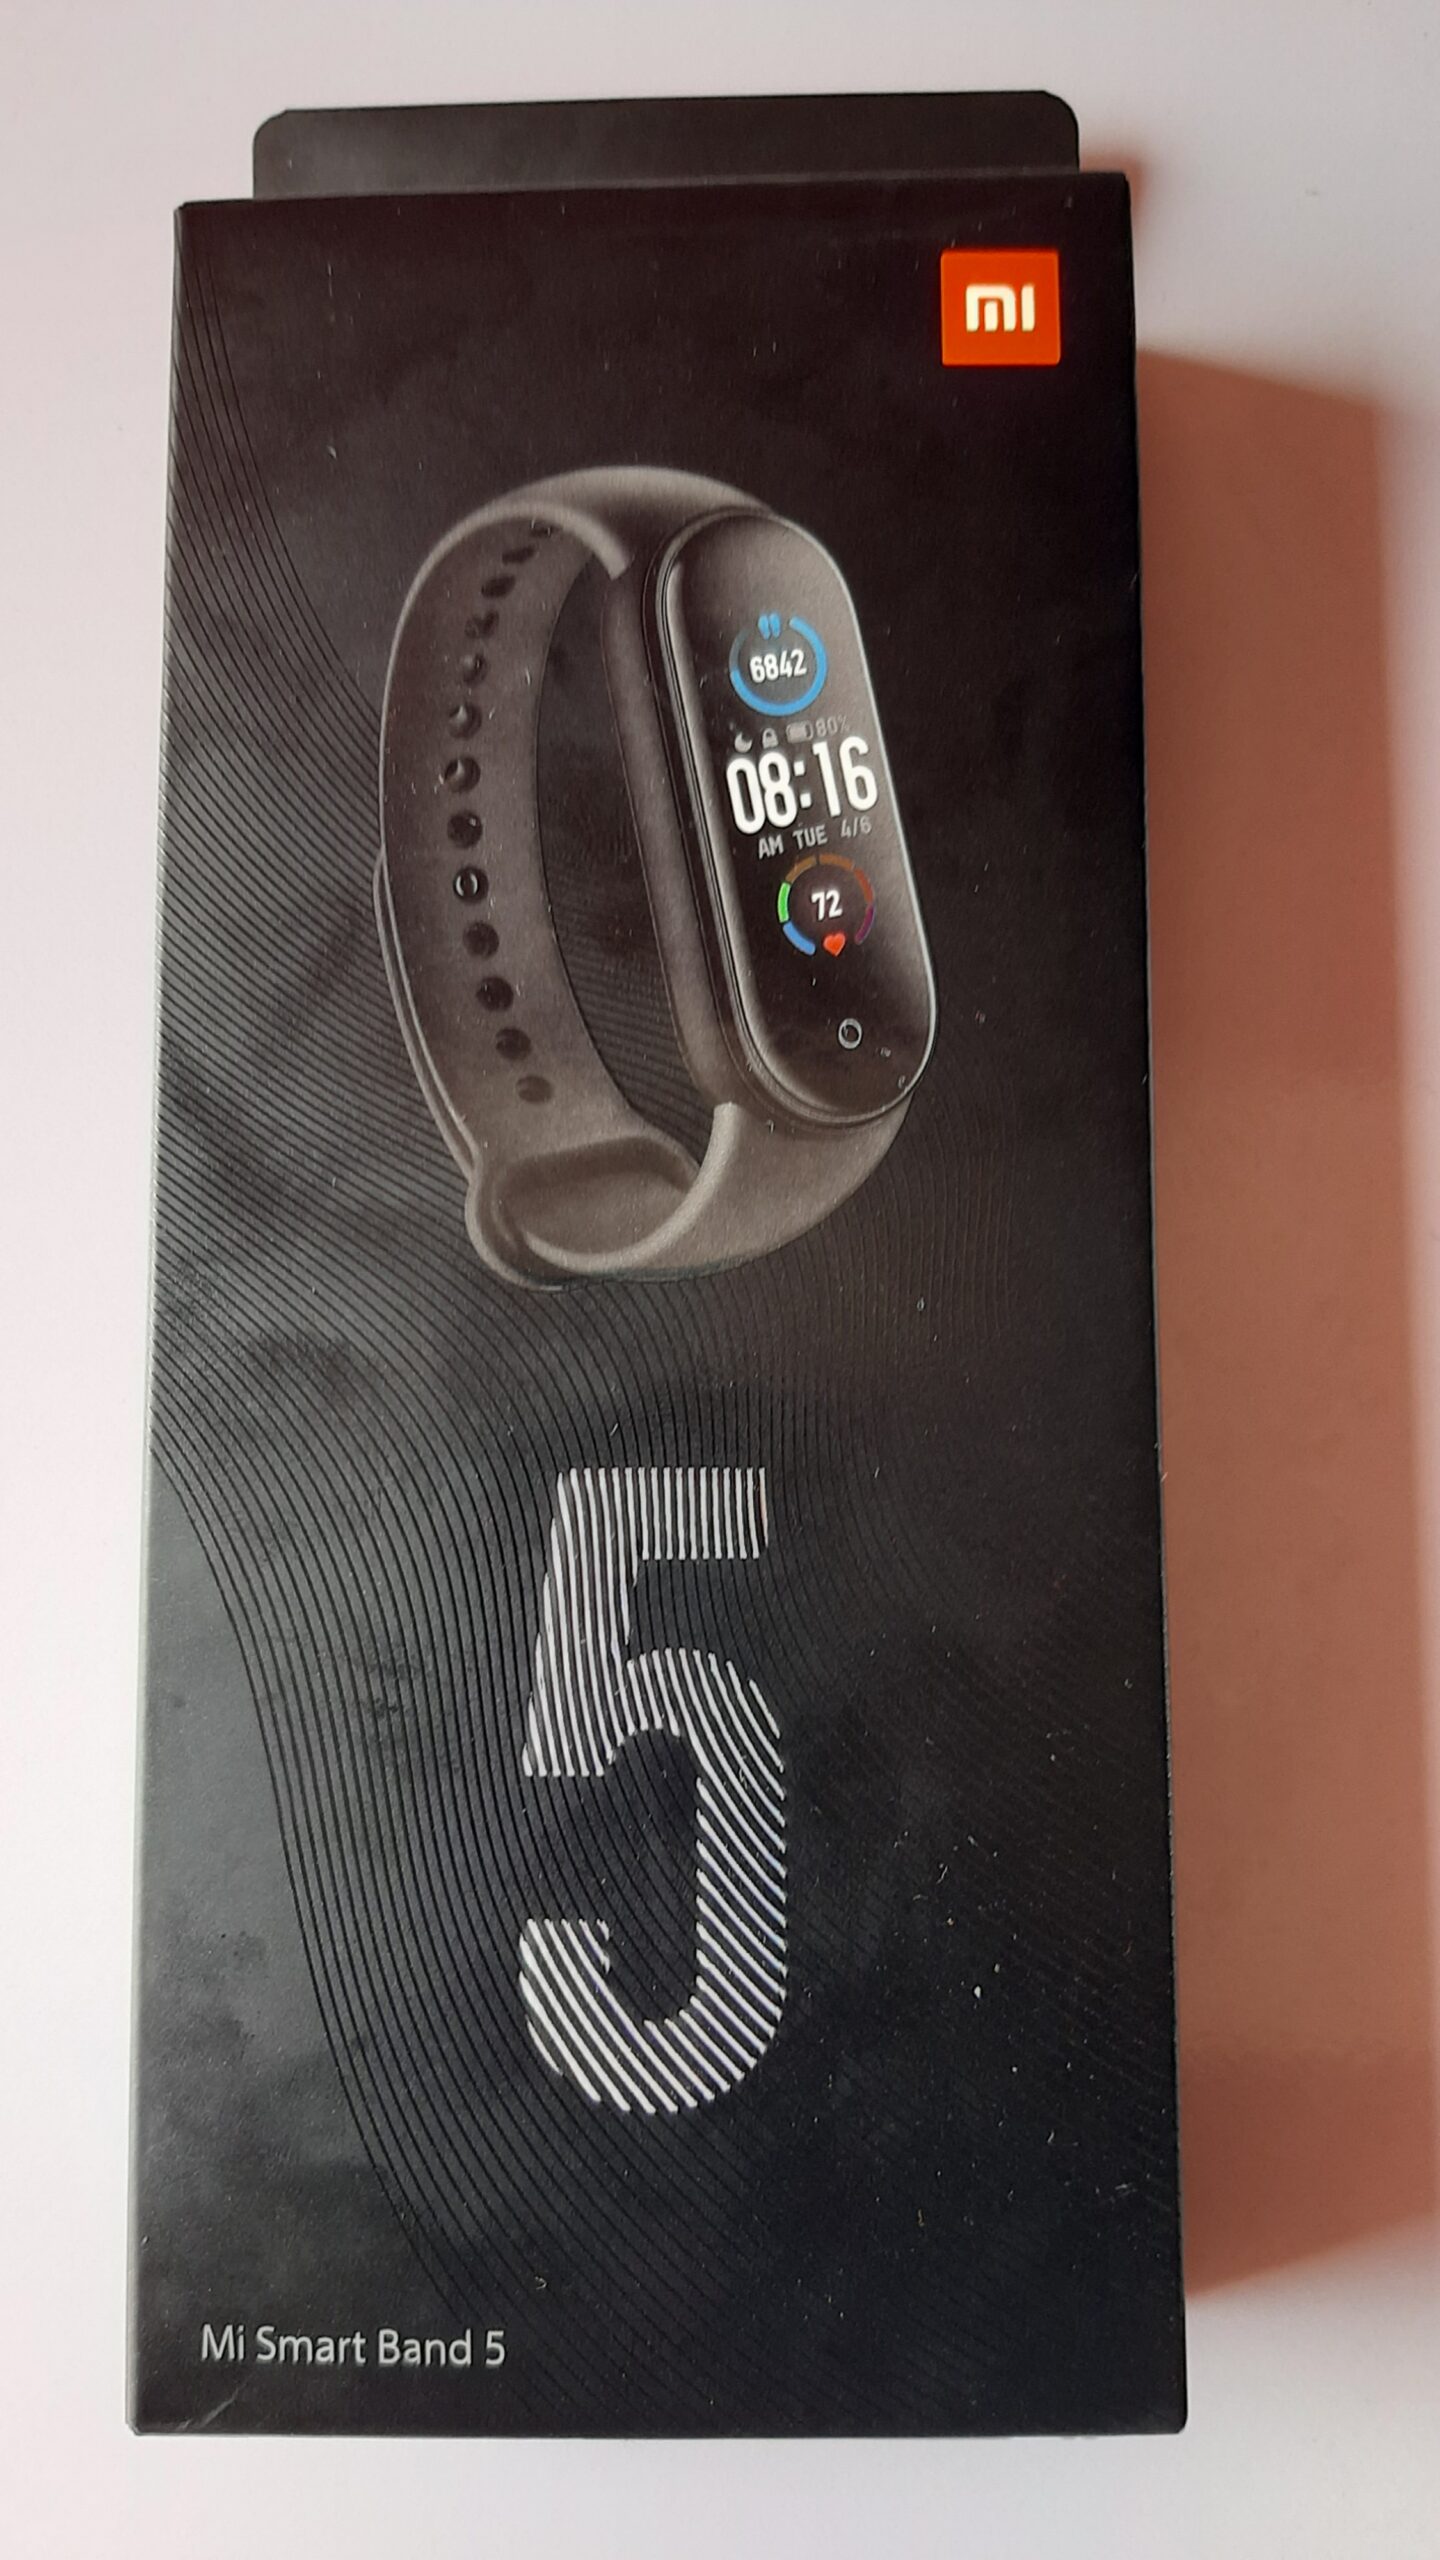 Mi Band 5 - Complete Setup For Android and iOS Phones